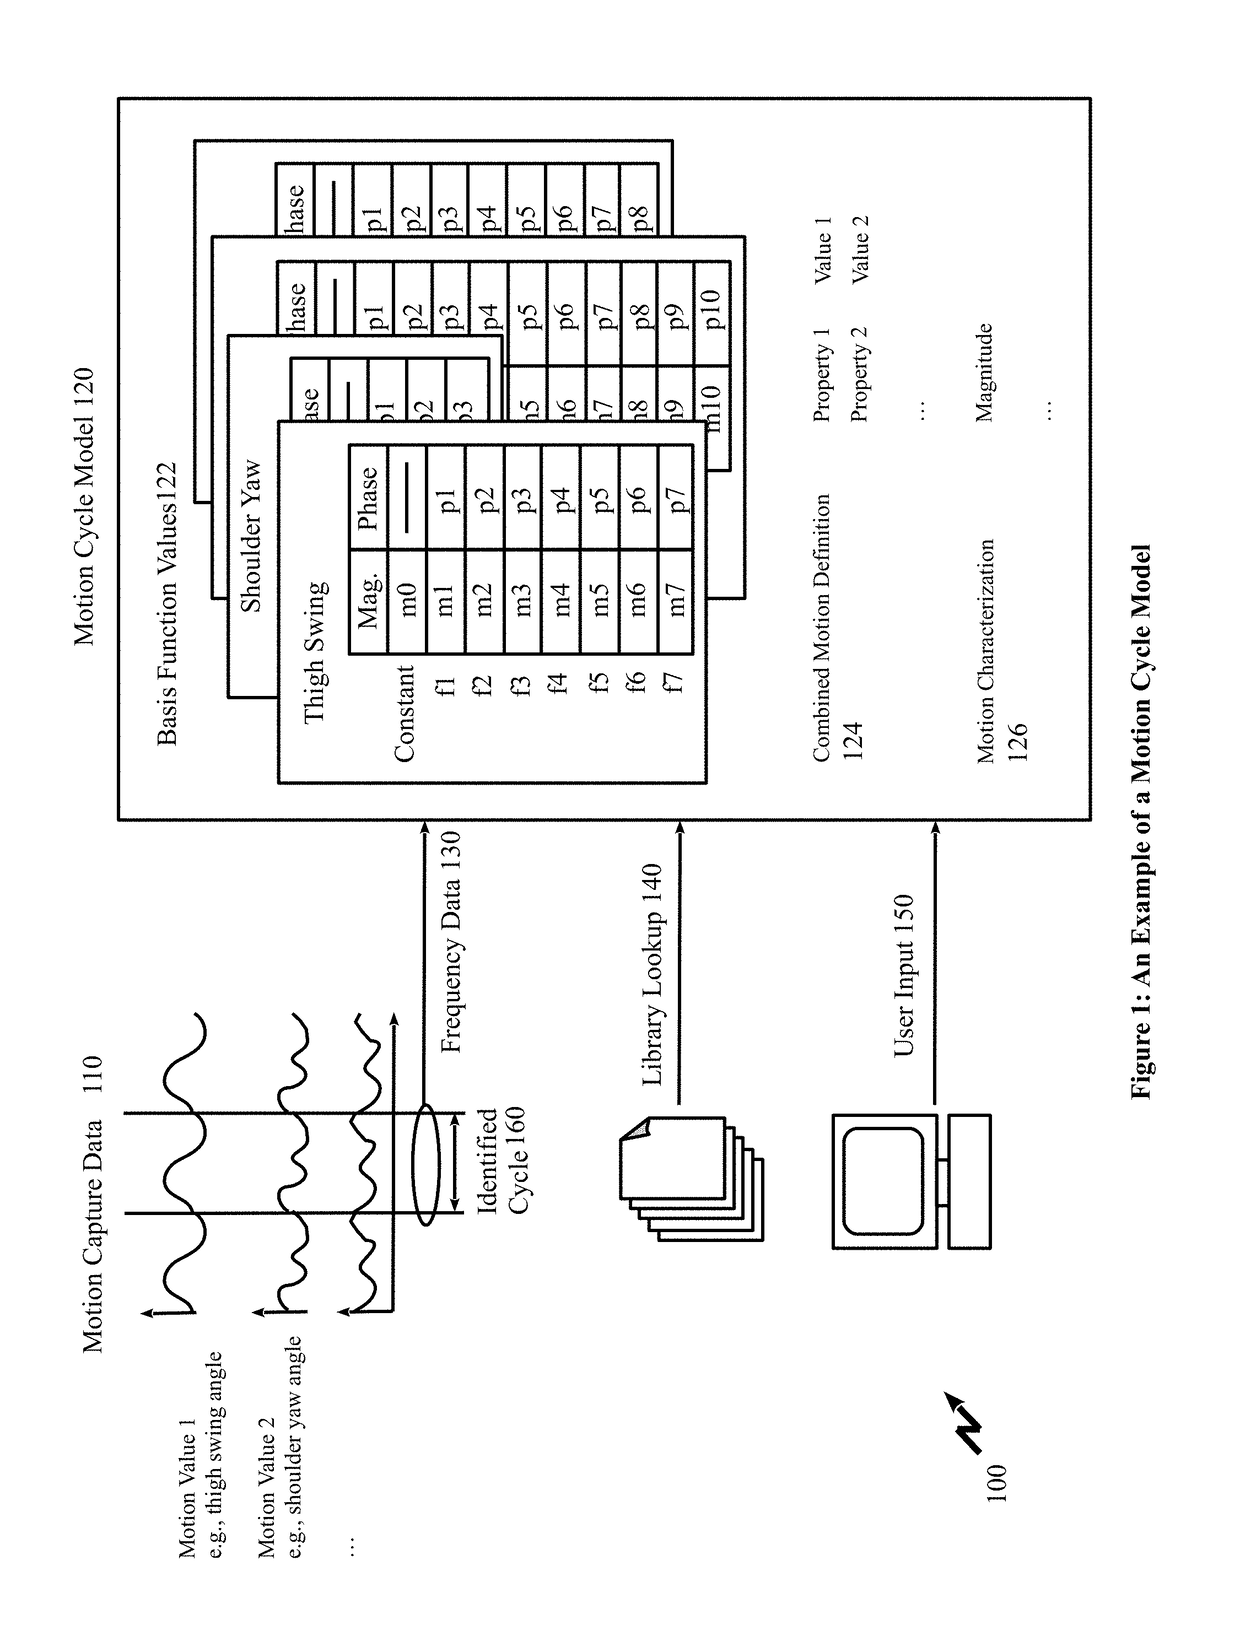 Motion model synthesizer methods and systems